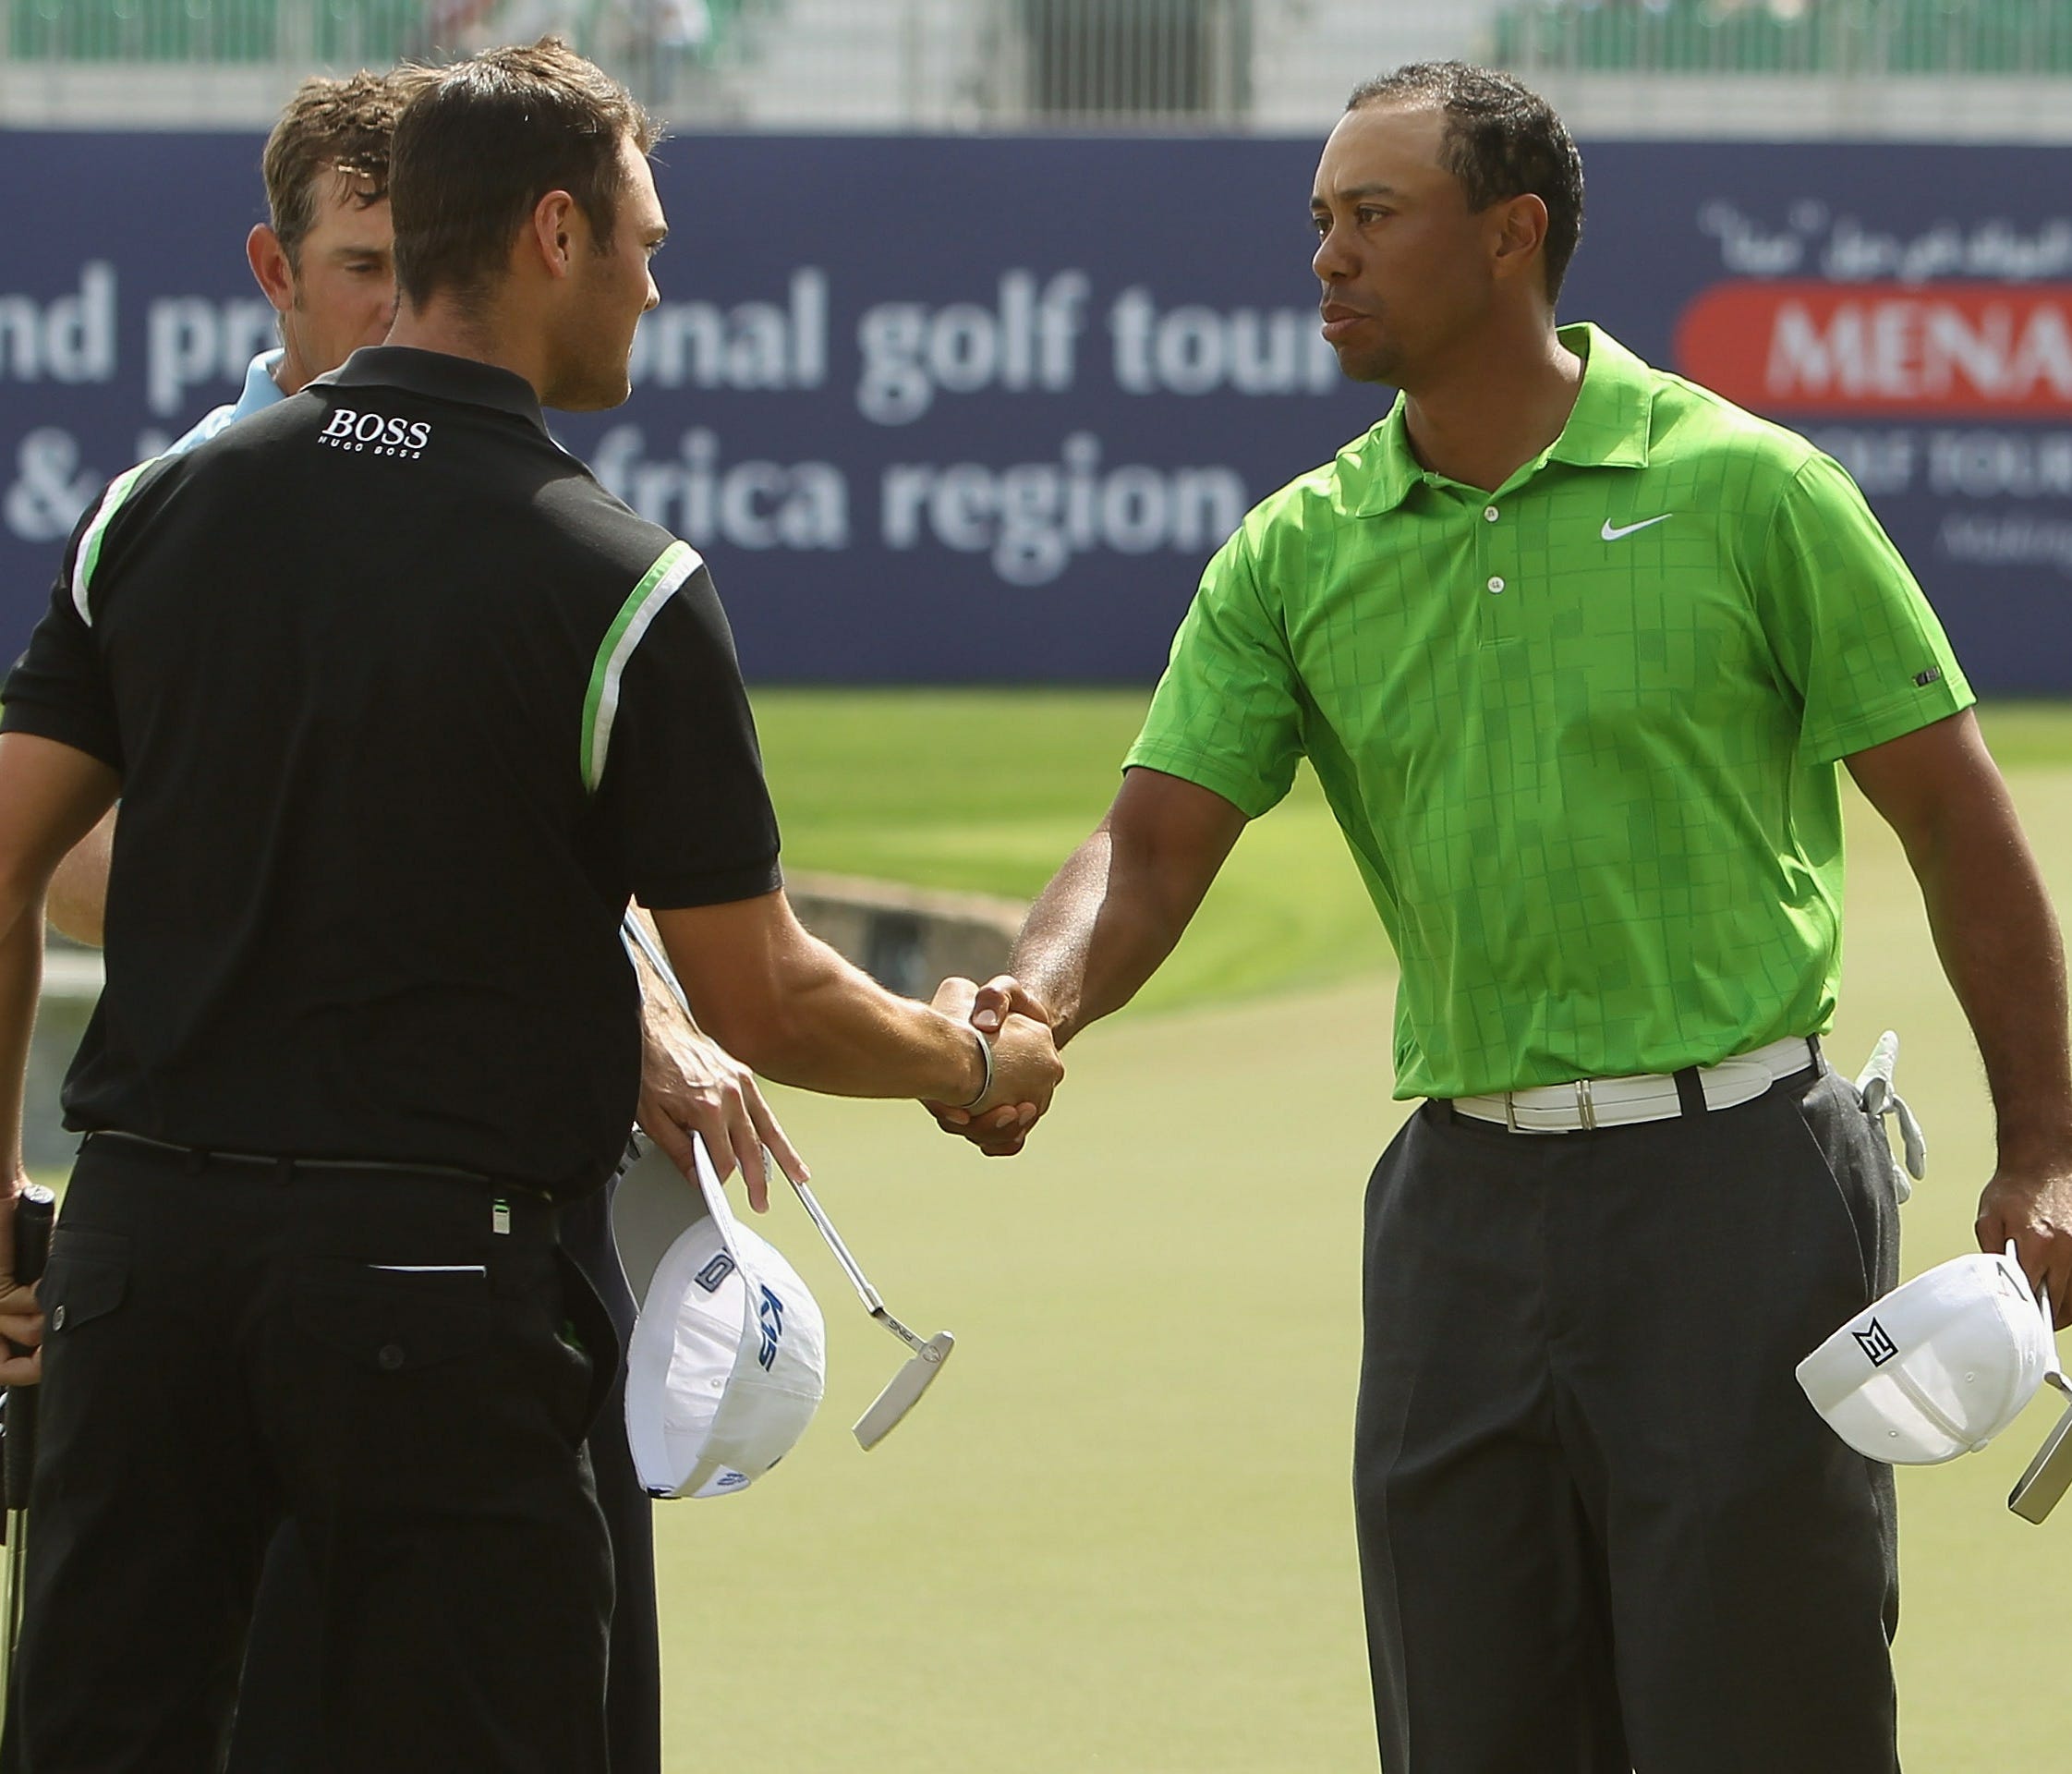 ORG XMIT: 108143329 DUBAI, UNITED ARAB EMIRATES - FEBRUARY 11:  Tiger Woods of the USA (L) and Martin Kaymer of Germany shake hands during the second round for the 2011 Omega Dubai desert Classic held on the Majilis Course at the Emirates Golf Club o